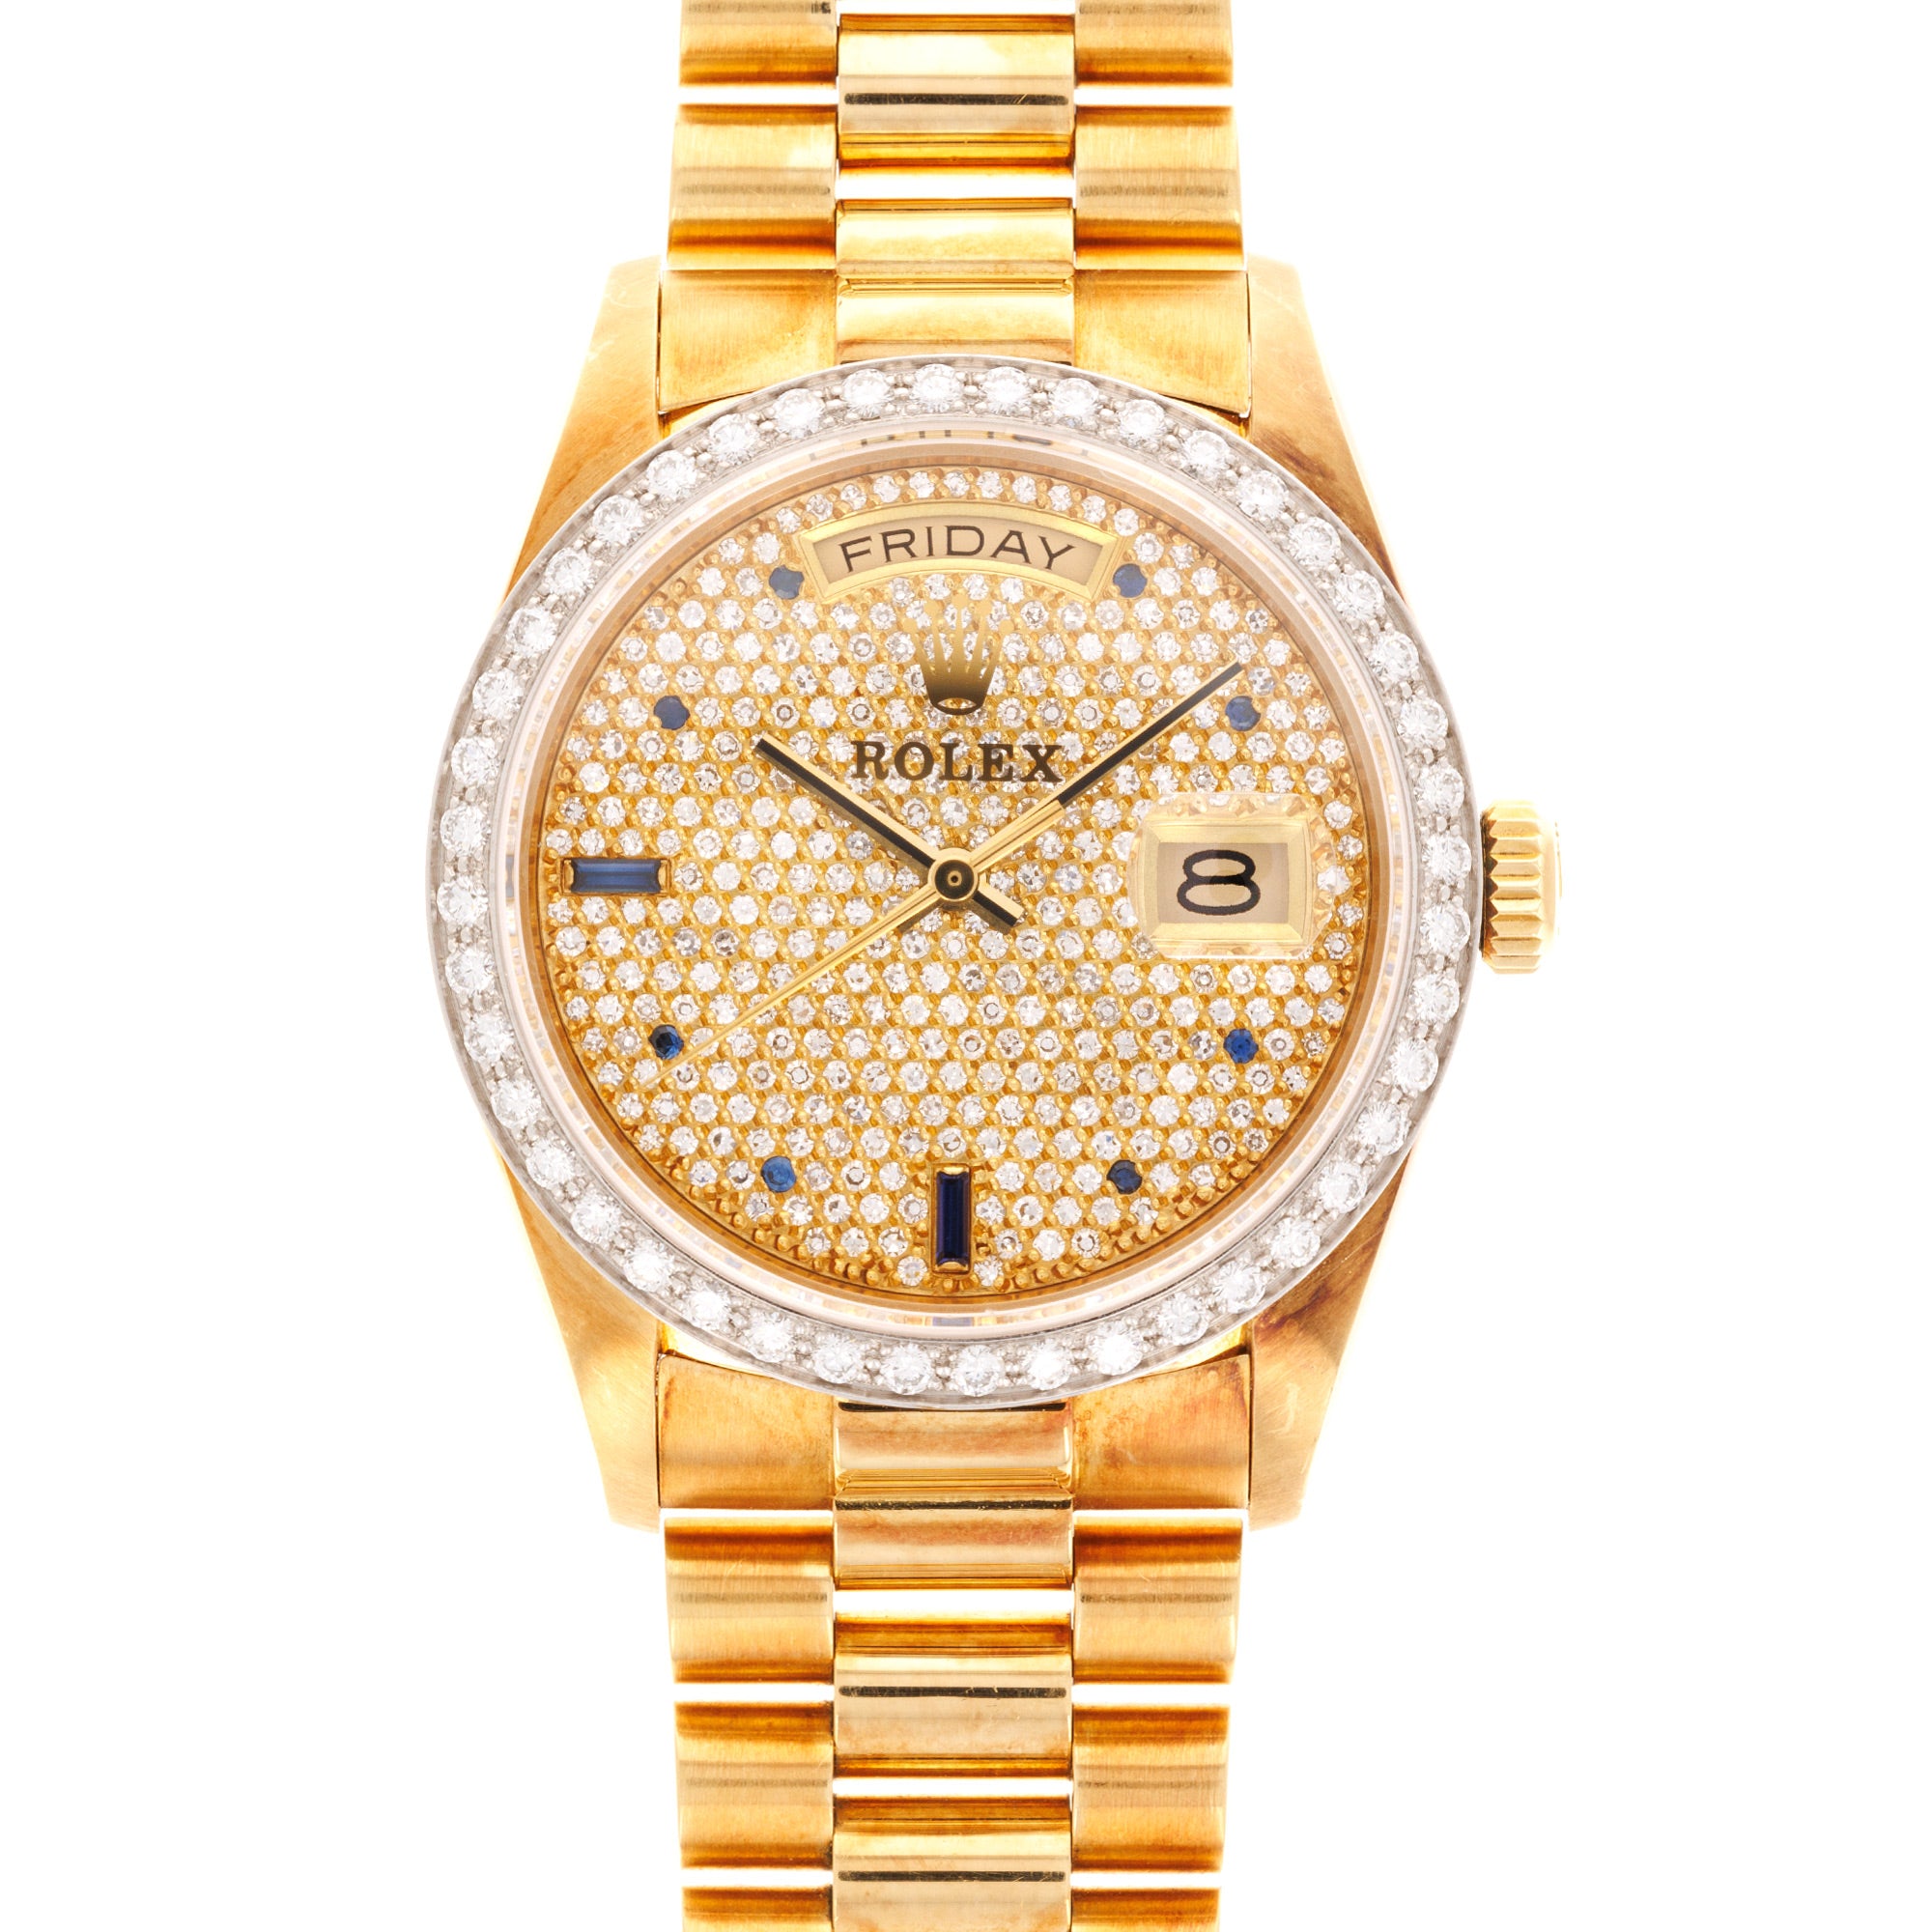 Rolex - Rolex Yellow Gold Day-Date Watch Ref. 18048 with Pave Diamond and Sapphire Dial - The Keystone Watches